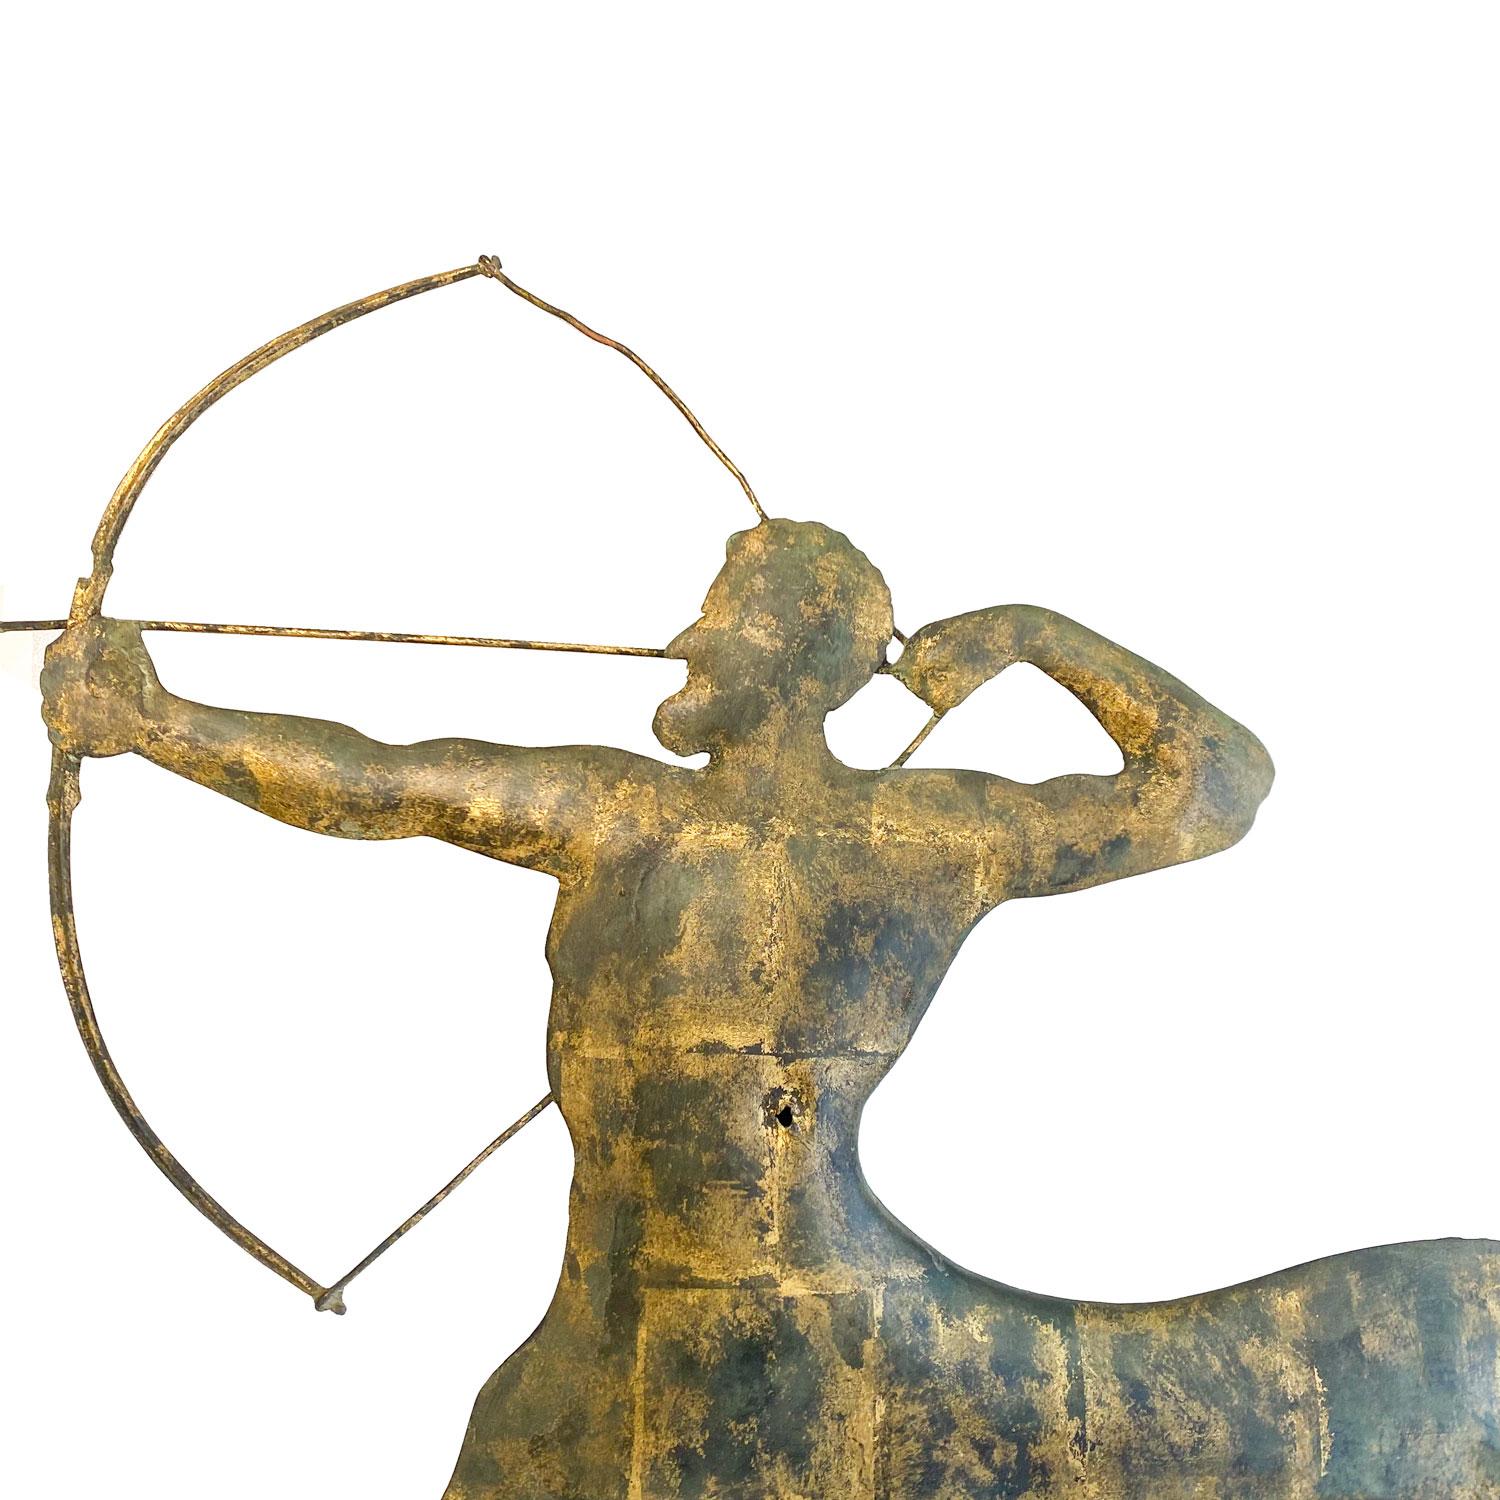 Swell body molded copper weathervane with sheet copper tail, the bow and arrow are thick metal wire.. Great weathered surface with paint and gilding with areas of verdigris, few bullet holes. Attributed to A.L. Jewell & Company, Waltham, Ma, late